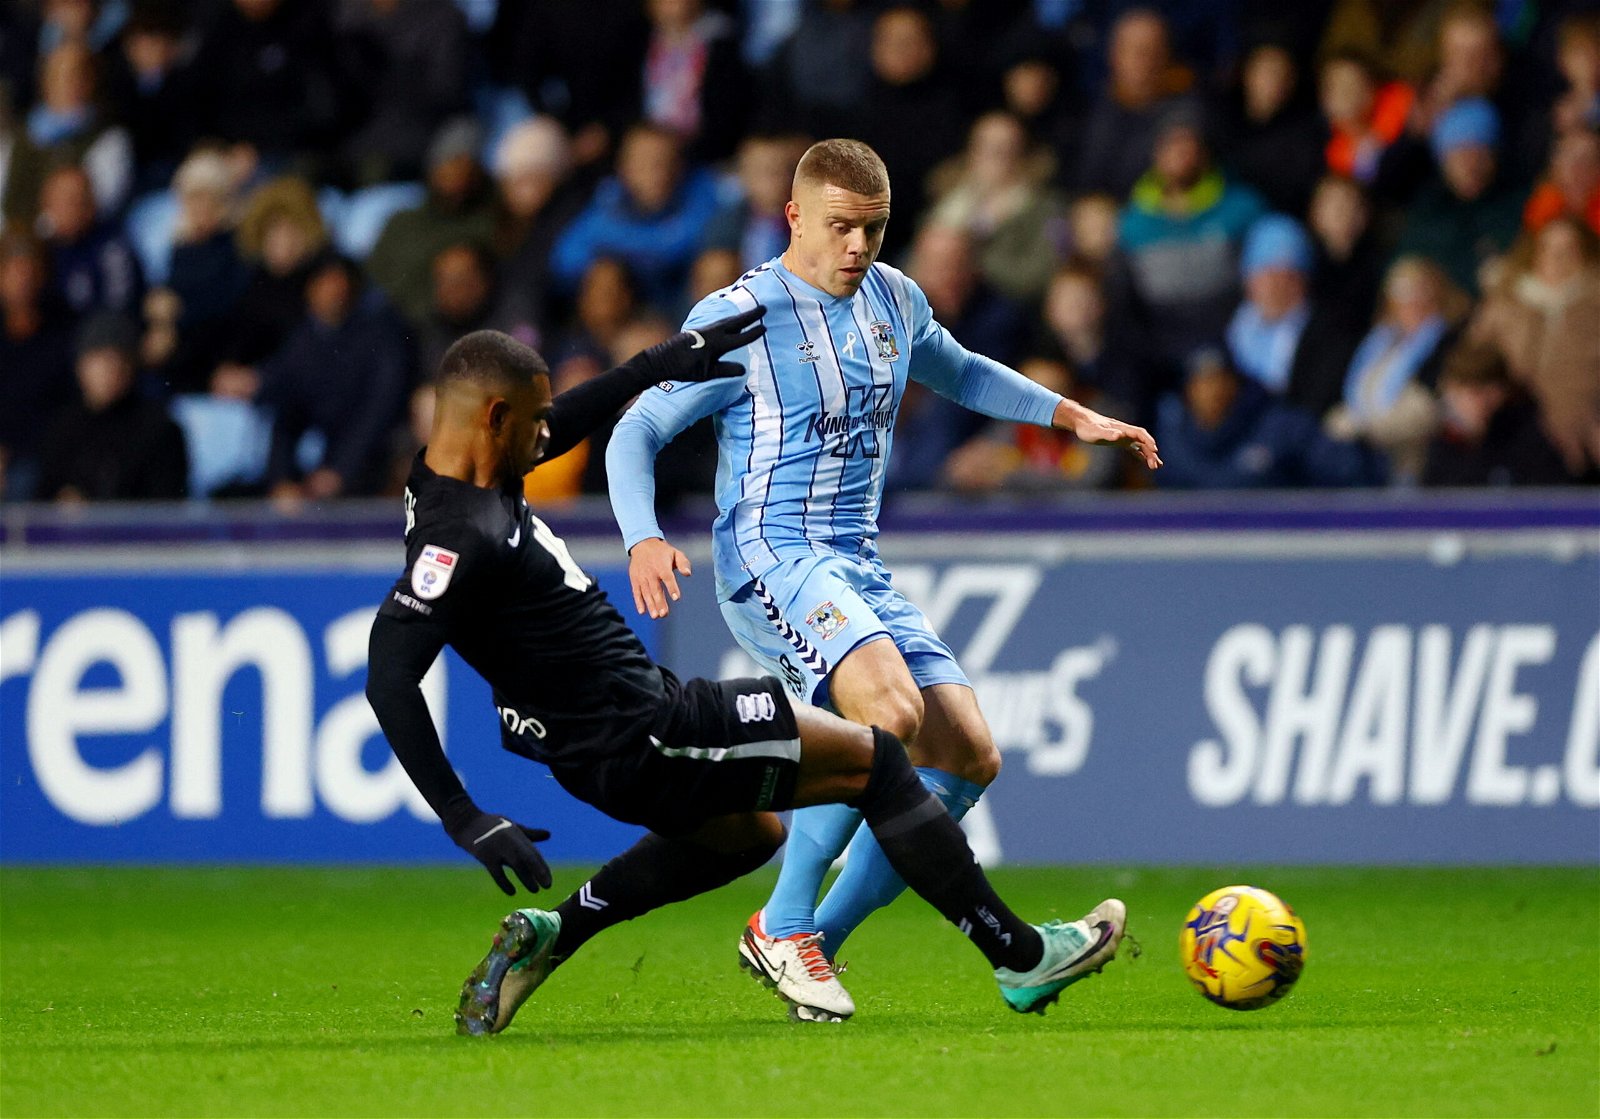 30-year-old facing uncertain Coventry City future with summer targets eyed  - The72 - Football League News